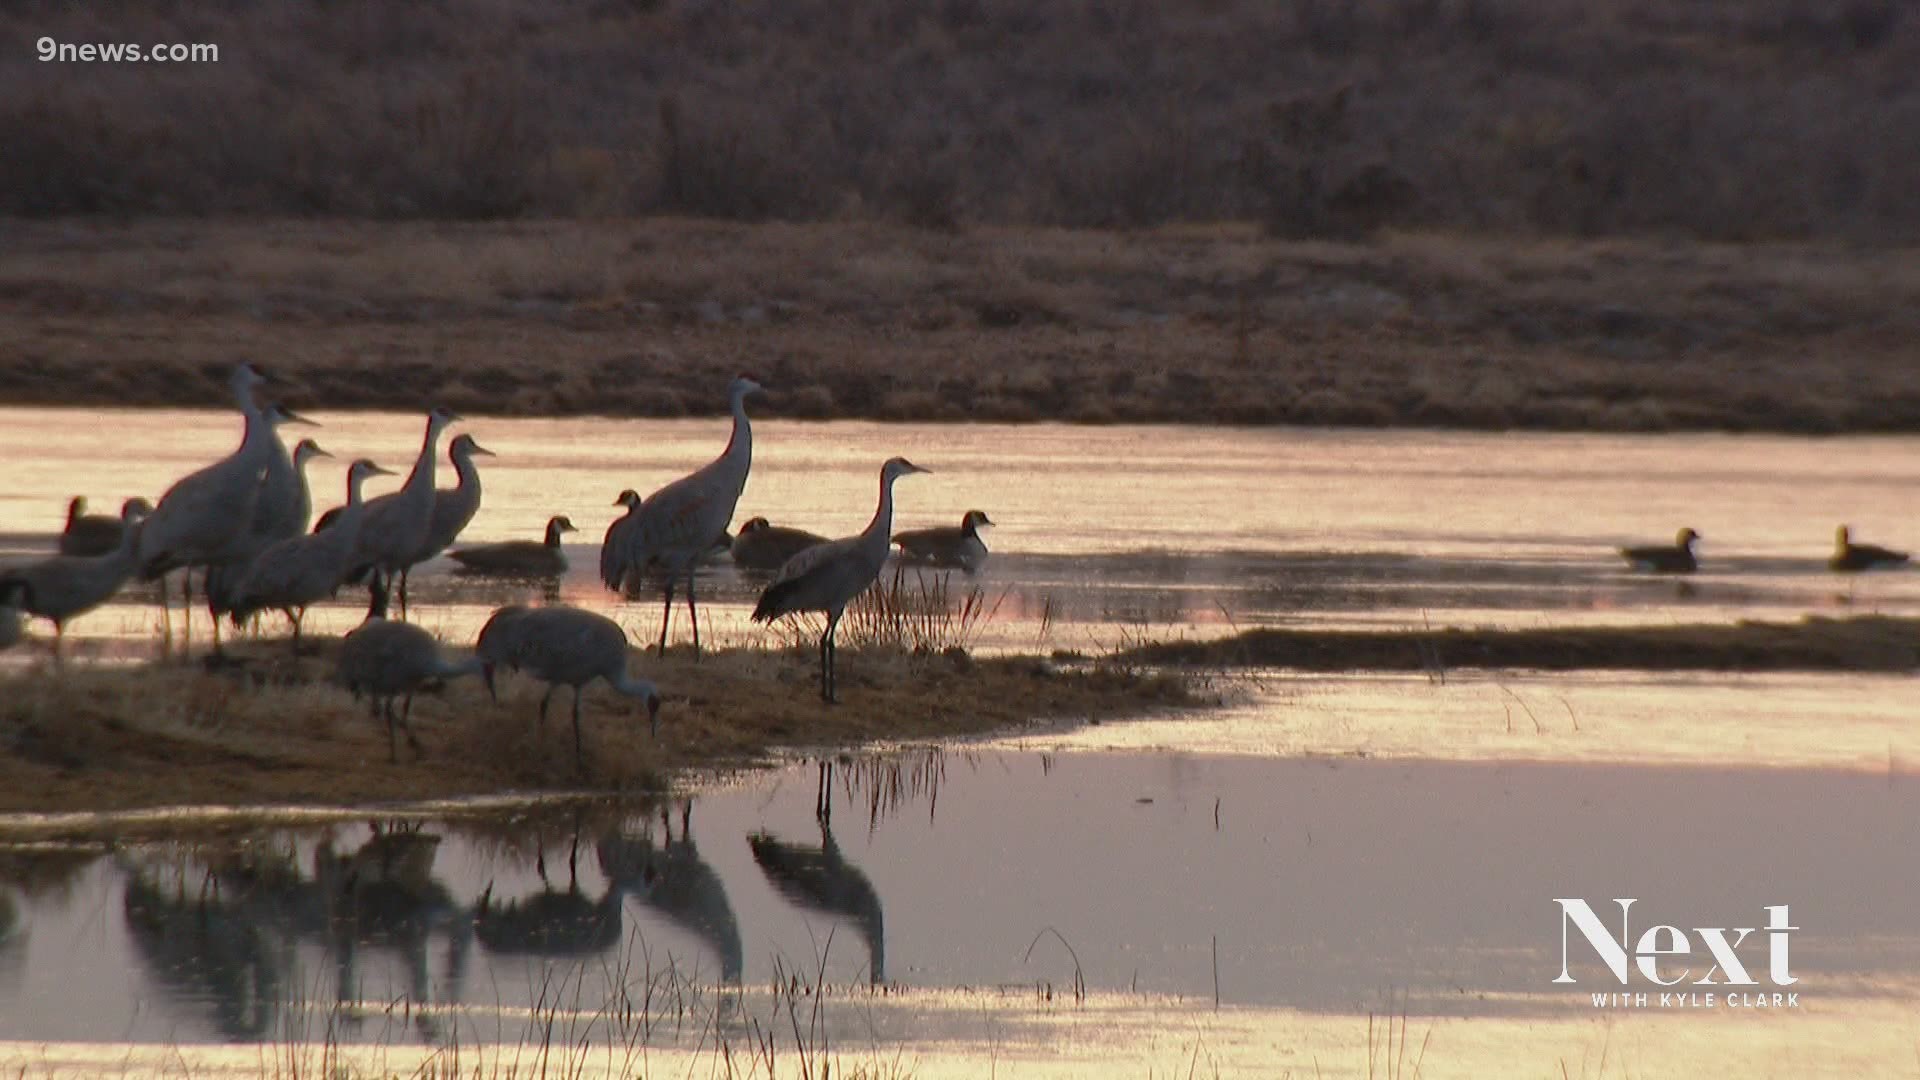 Since last March, so many flights have been canceled due to the pandemic. The sandhill cranes at the Monte Vista National Wildlife Refuge are an exception.